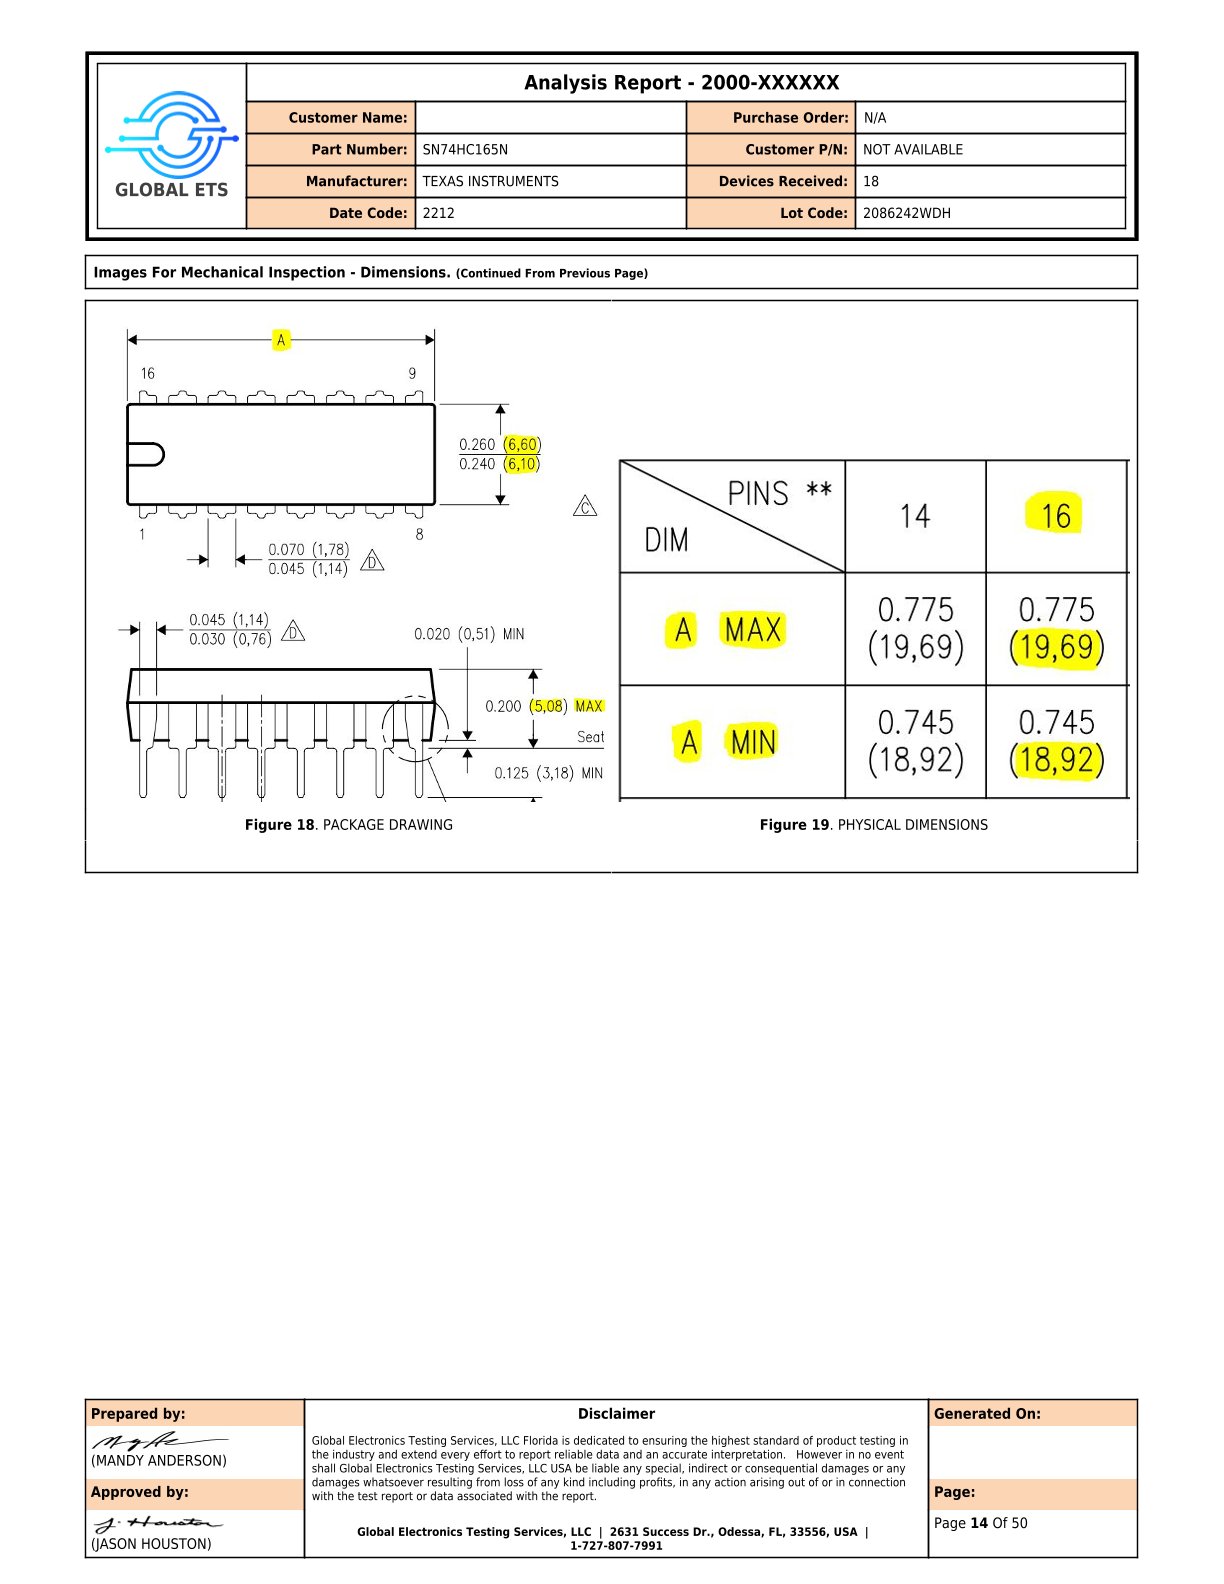 Analysis Report from Global ETS with part number SN74HC165N, manufacturer Texas Instruments, and date code 2212. Images for mechanical inspection, package drawing and physical dimensions of a component with 16 pins, highlighting maximum and minimum dimensions in inch and millimeters. 